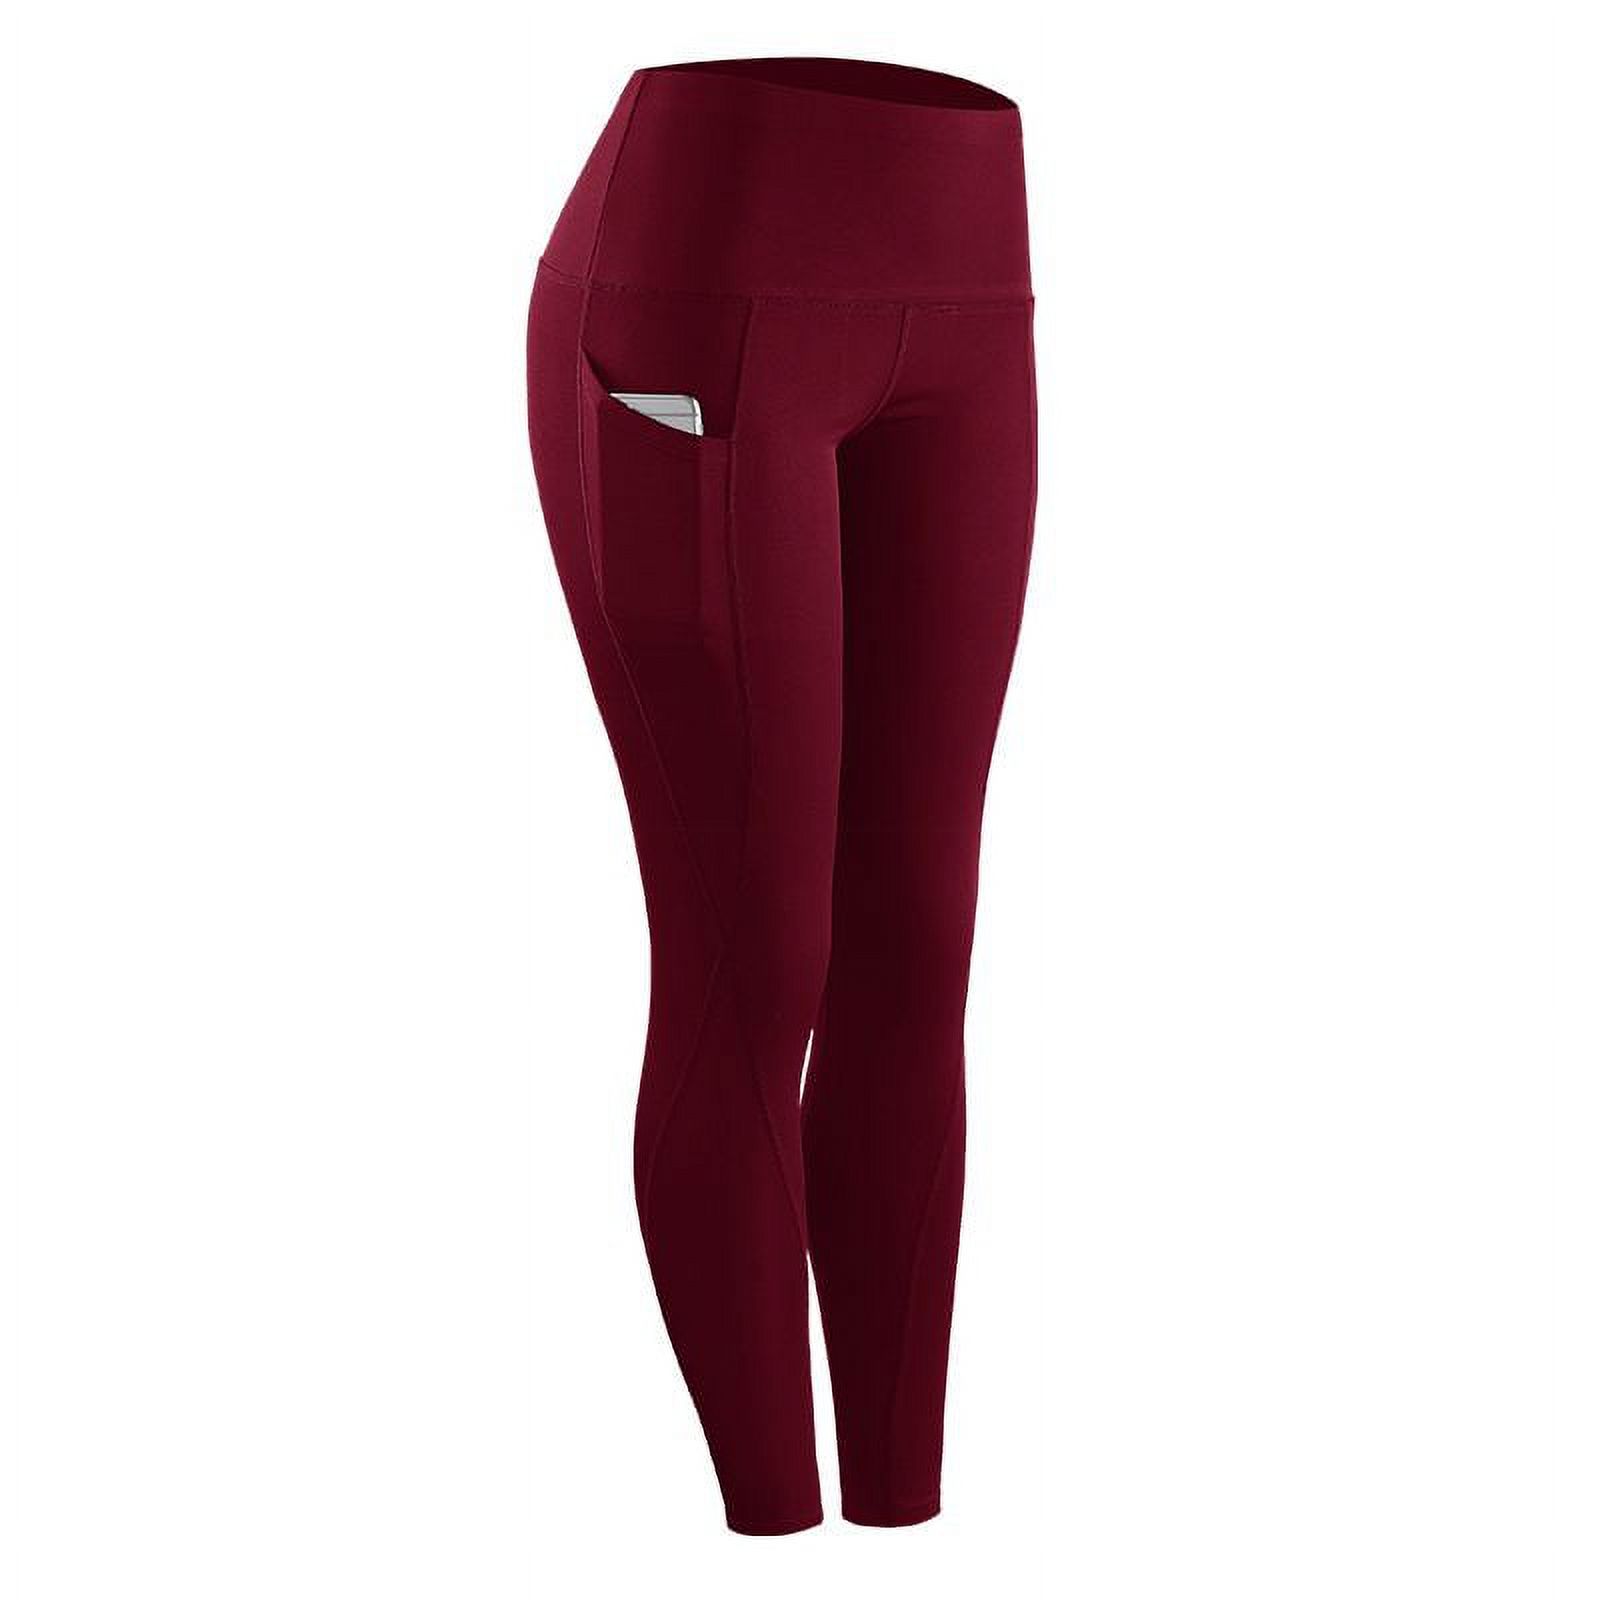 Women High Elastic Leggings Pant Solid Stretch Compression Sportswear Casual Yoga Jogging Leggings Pants With Pocket - image 1 of 2